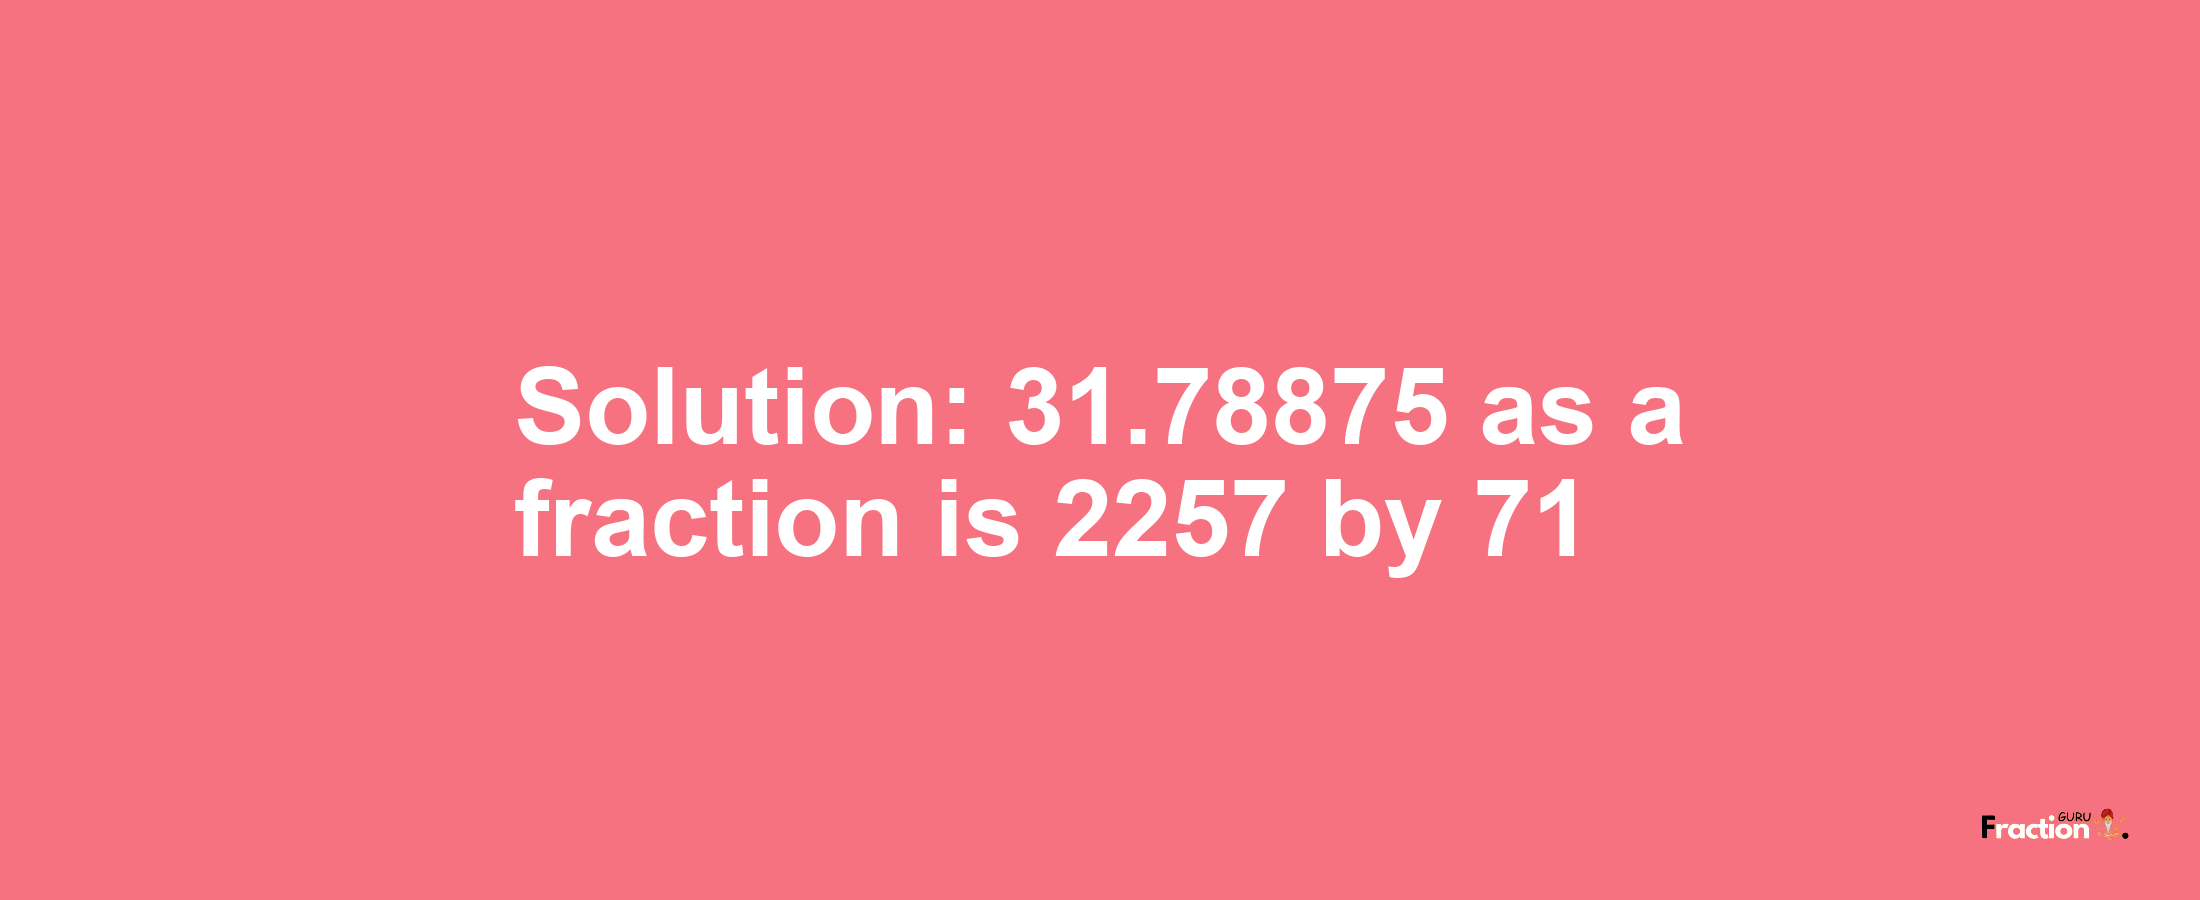 Solution:31.78875 as a fraction is 2257/71